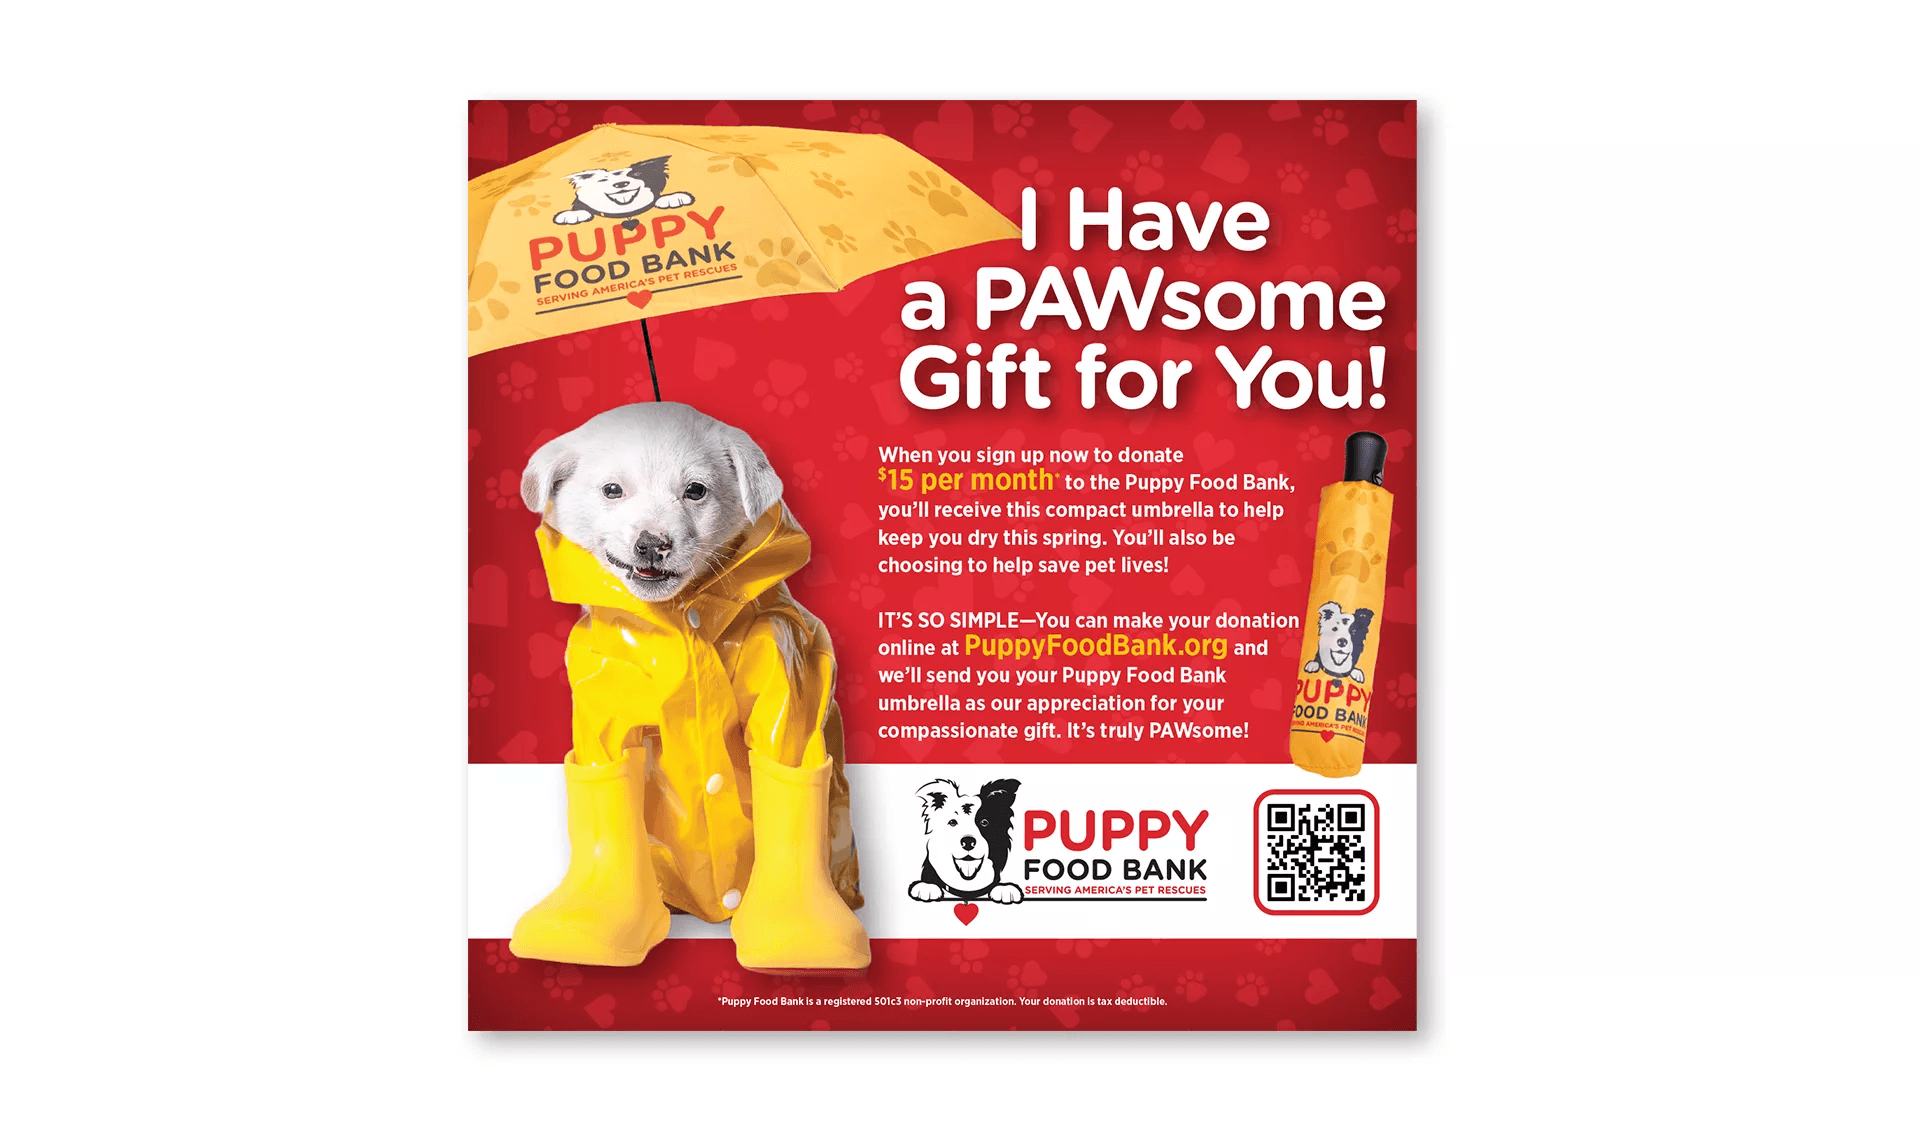 Puppy Food Bank, Rudy’s Pet Champions Ad